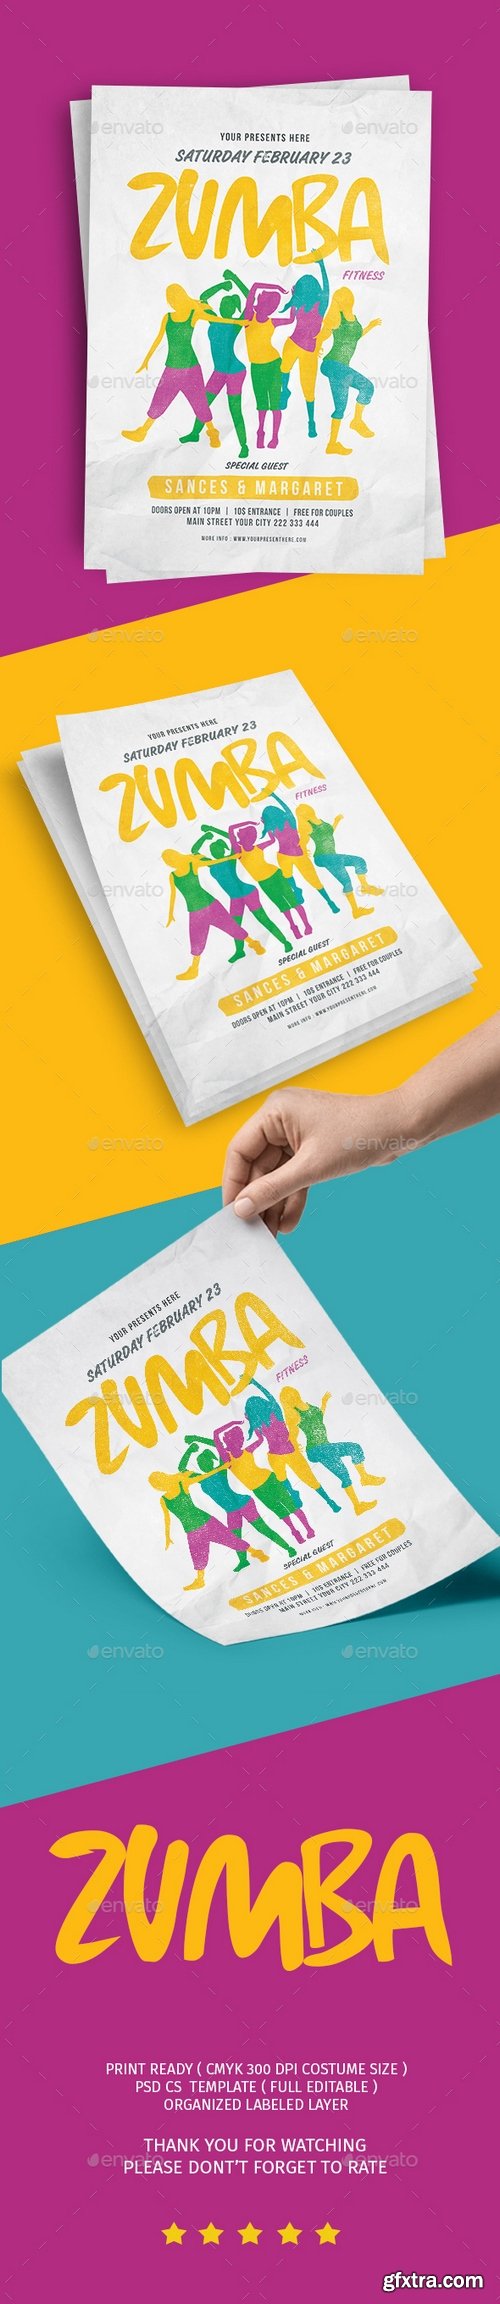 Graphicriver - Zumba Party Flyer Vol.2 21431924